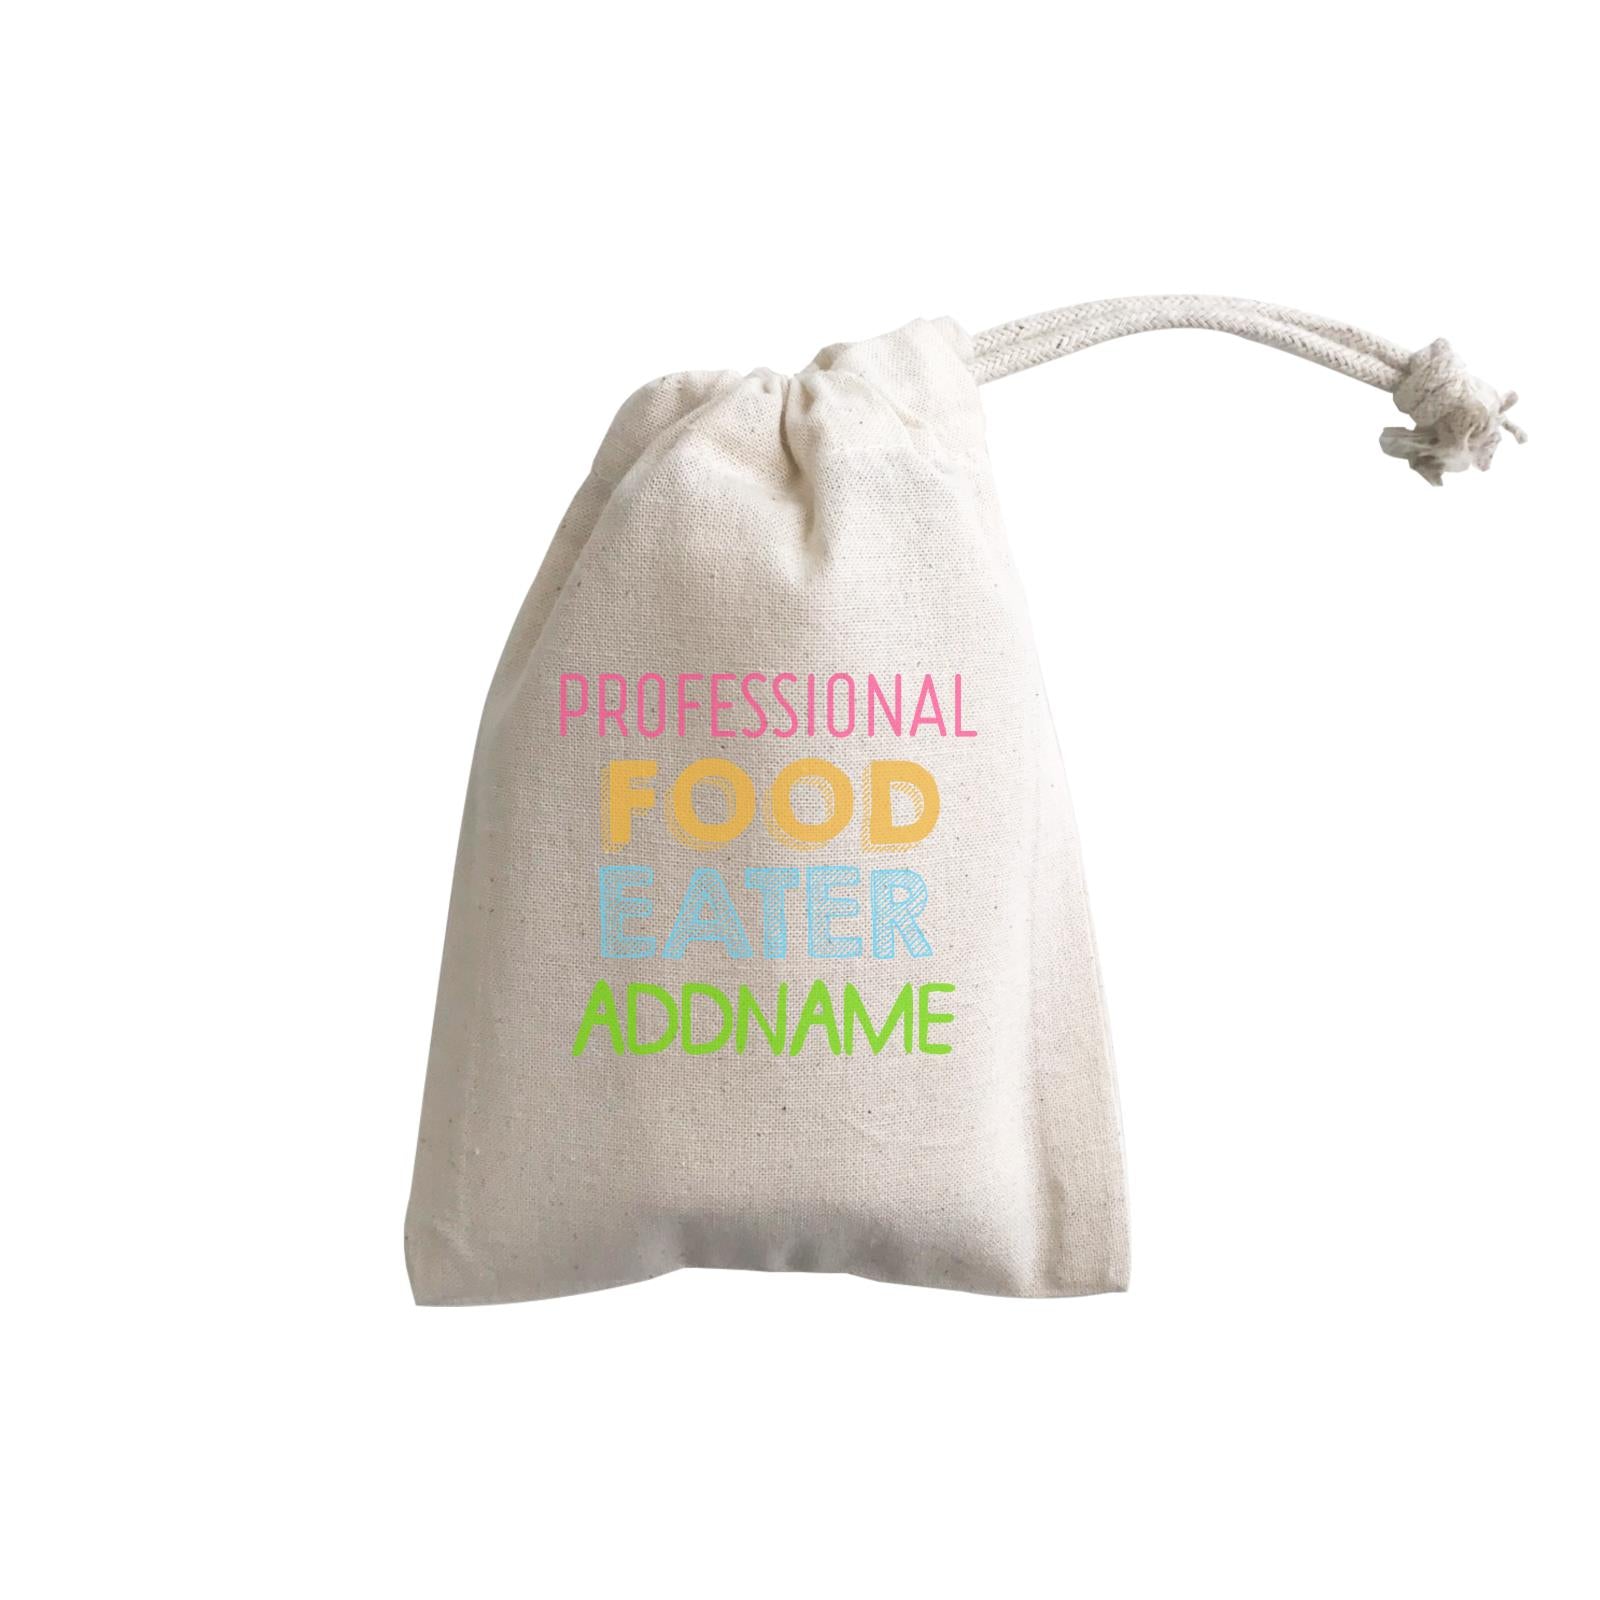 Professional Food Eater Addname GP Gift Pouch